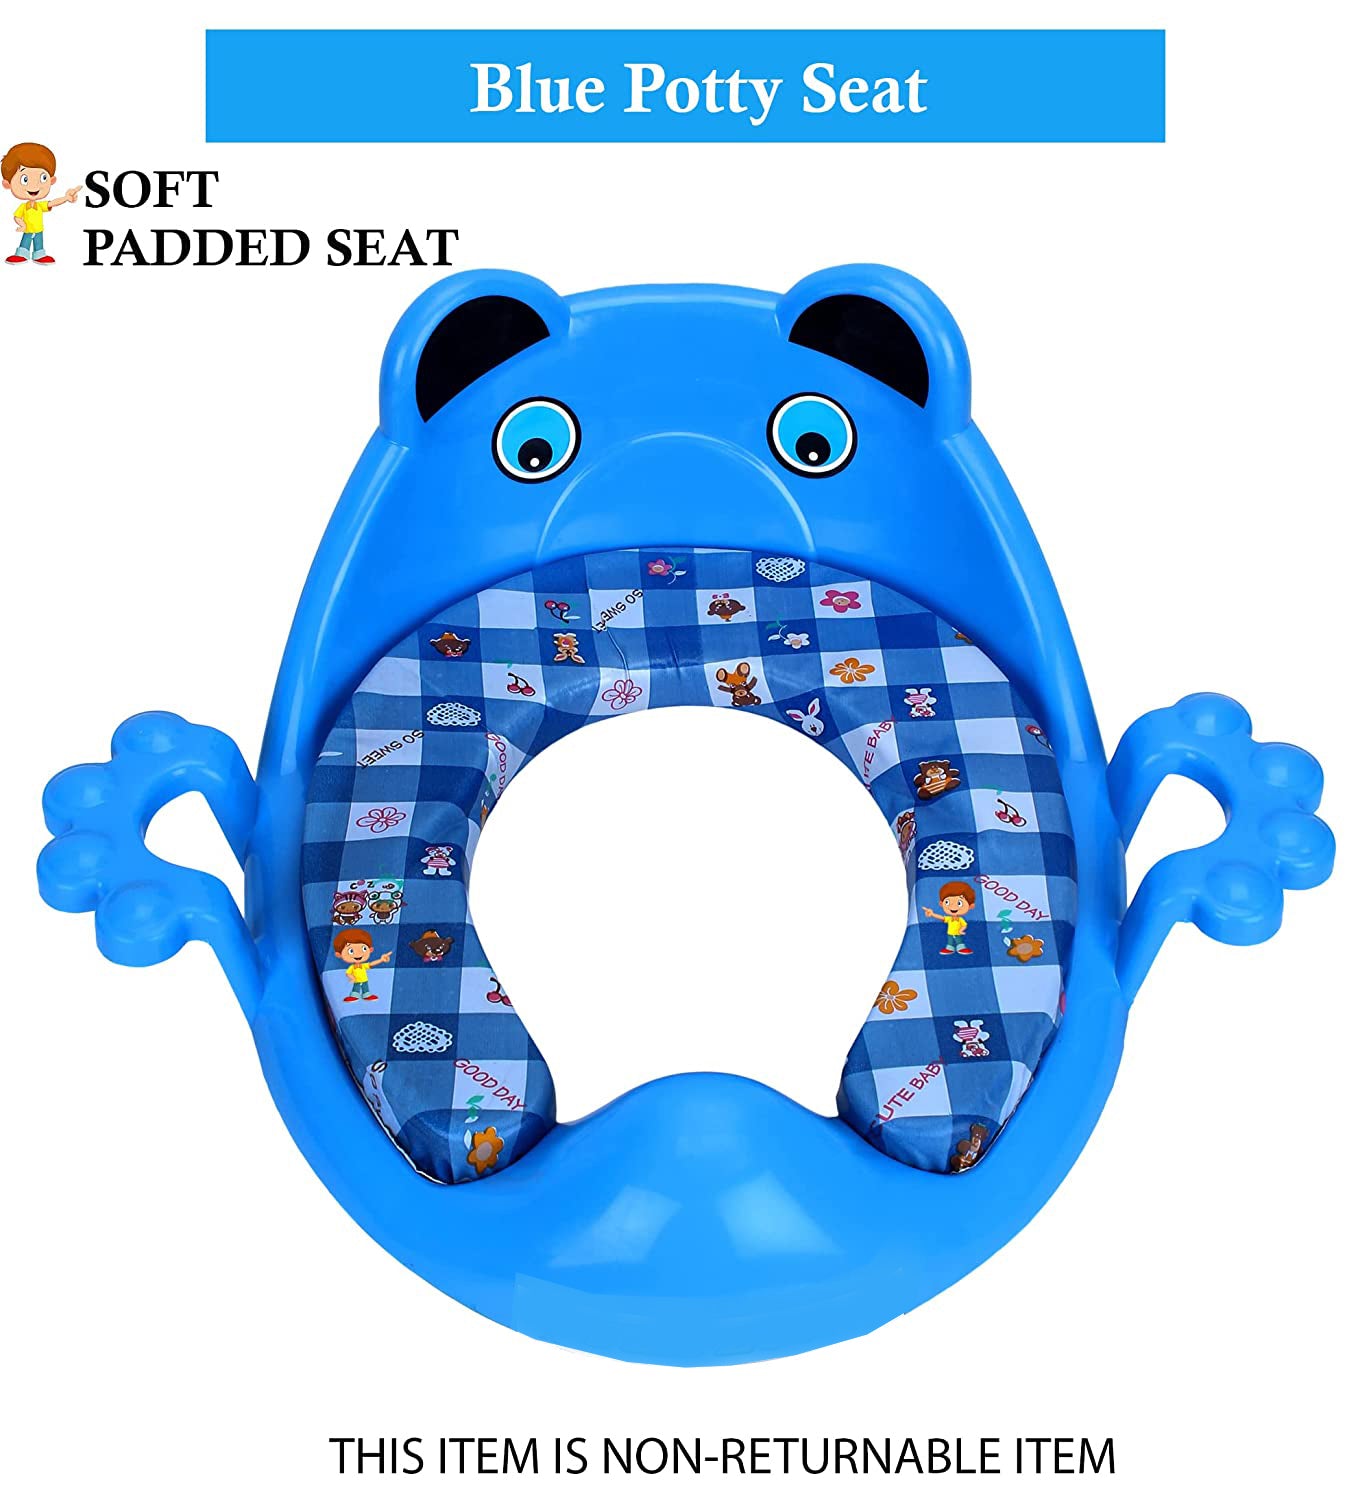 MM TOYS Premium Baby Cushioned Potty Seat with Easy Grip Handles and Comfortable Seat / Toilet Seat with Handle for Kids / Suitable for Baby Boy/Girl - Color May Vary